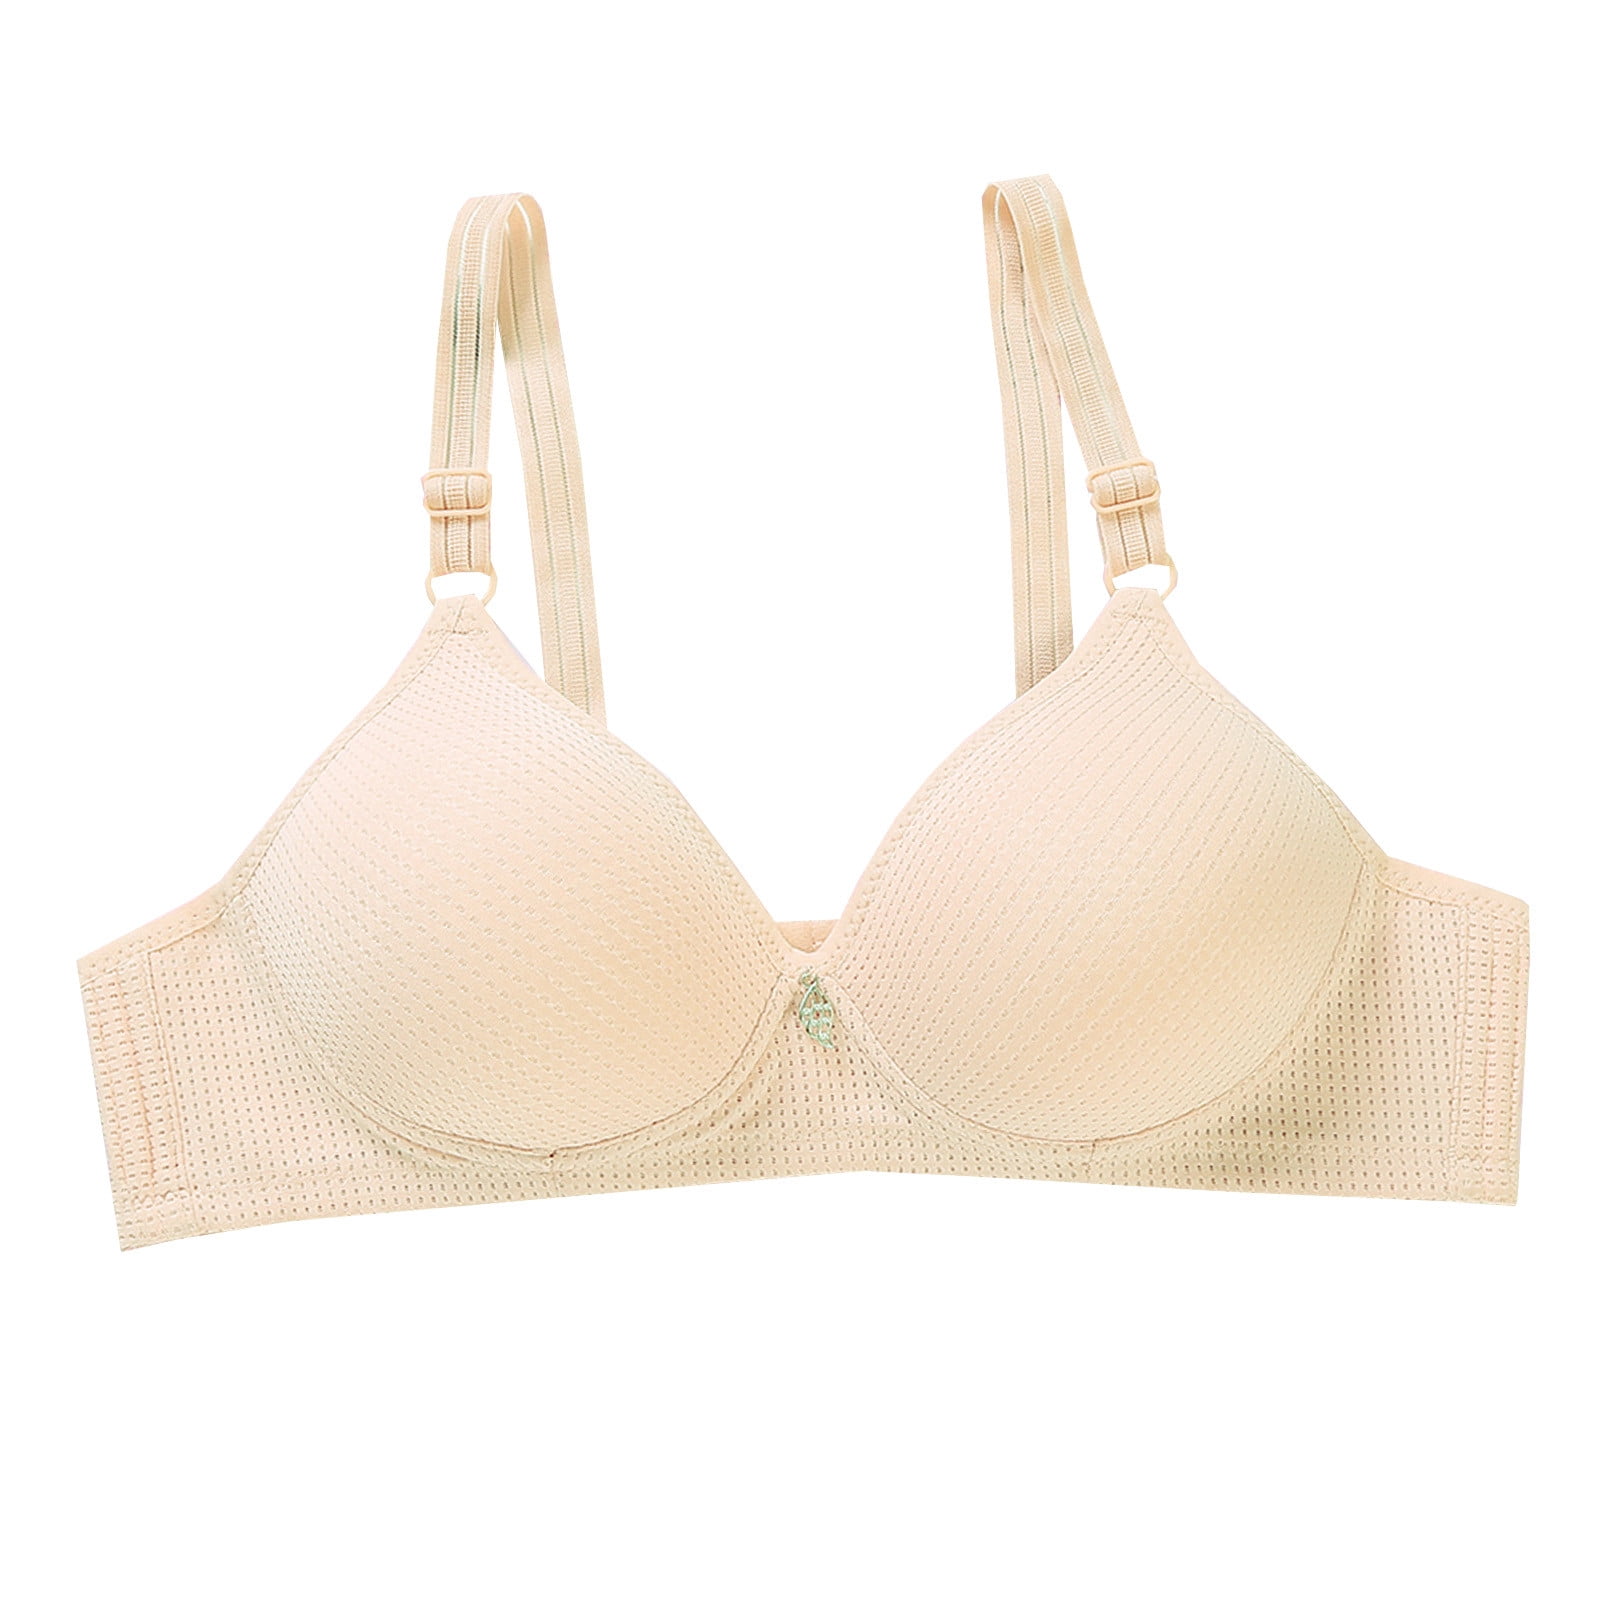 Buy StyFun Cotton Bra Combo for Women Breathable Fabric, Full Coverage Non-Wired  Bra, Cross Bra, Non-Padded, Pack of 1, Beige, Cup- B, Size- 30 at